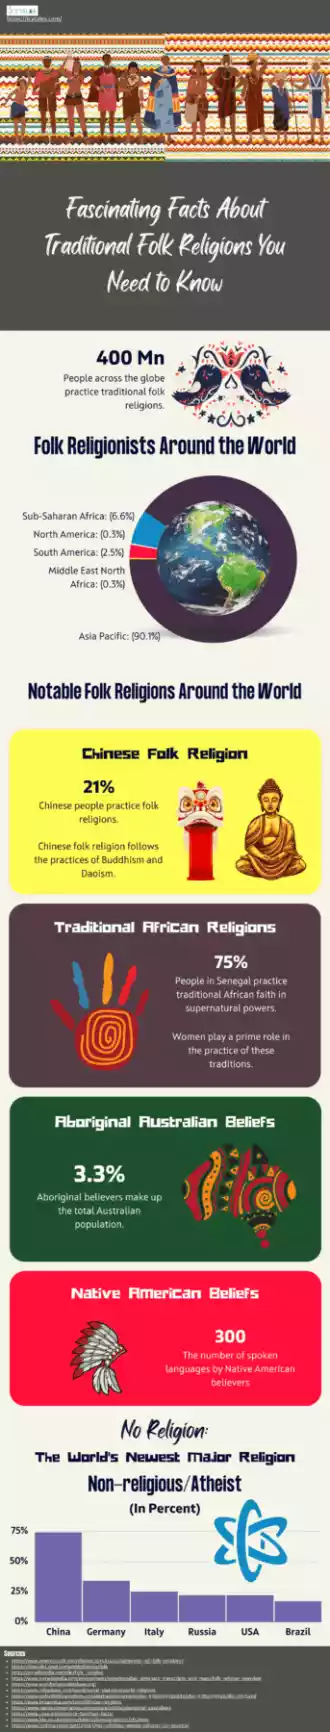 Fascinating Facts About Traditional Folk Religions You Need to Know